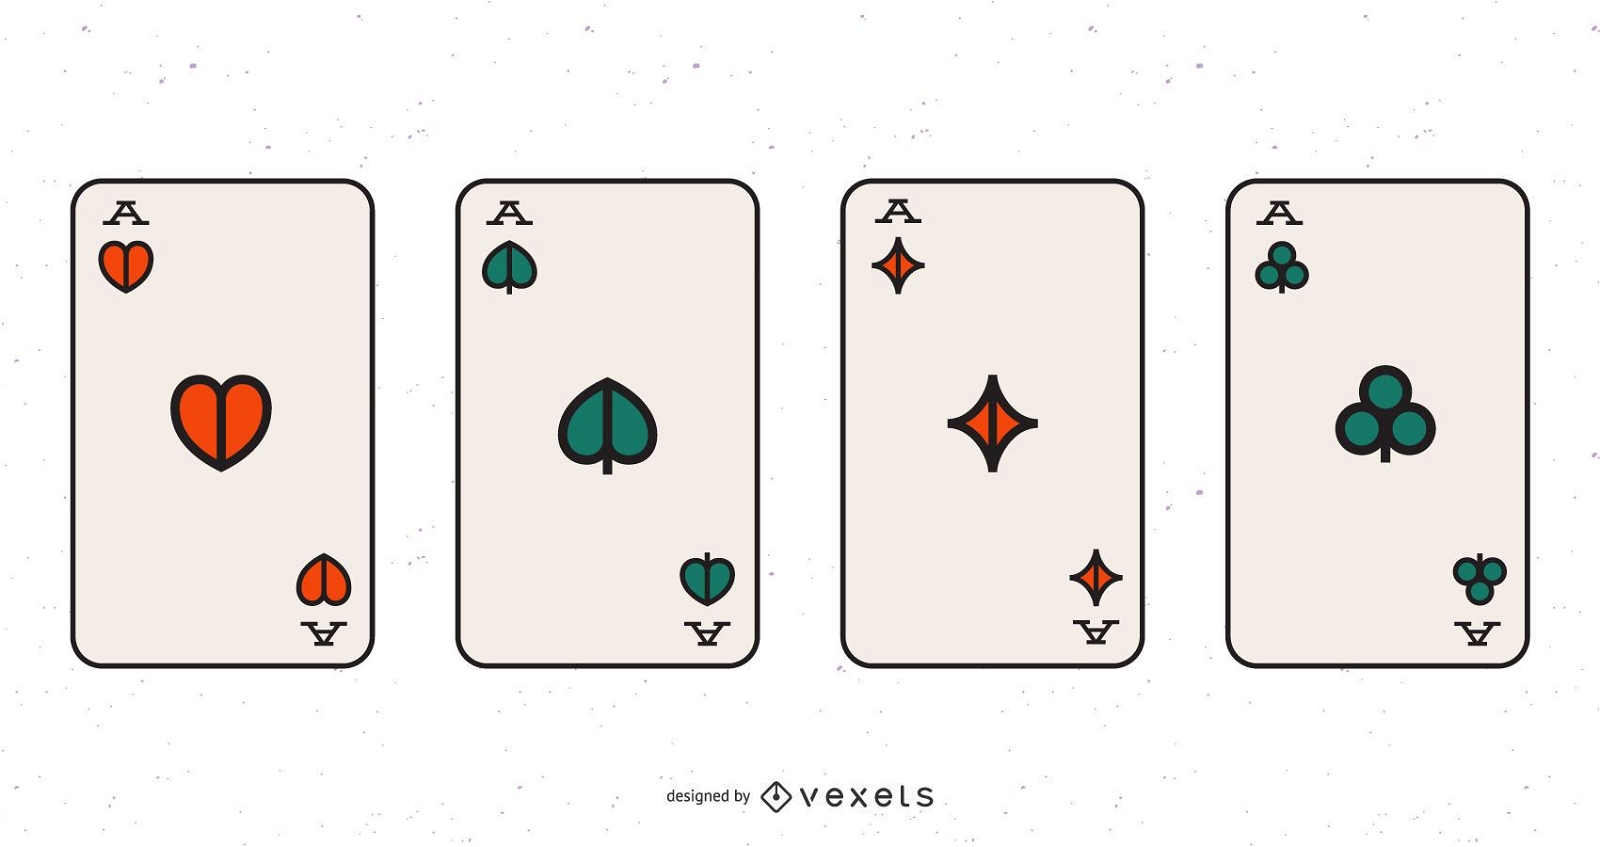 Poker Game Cards